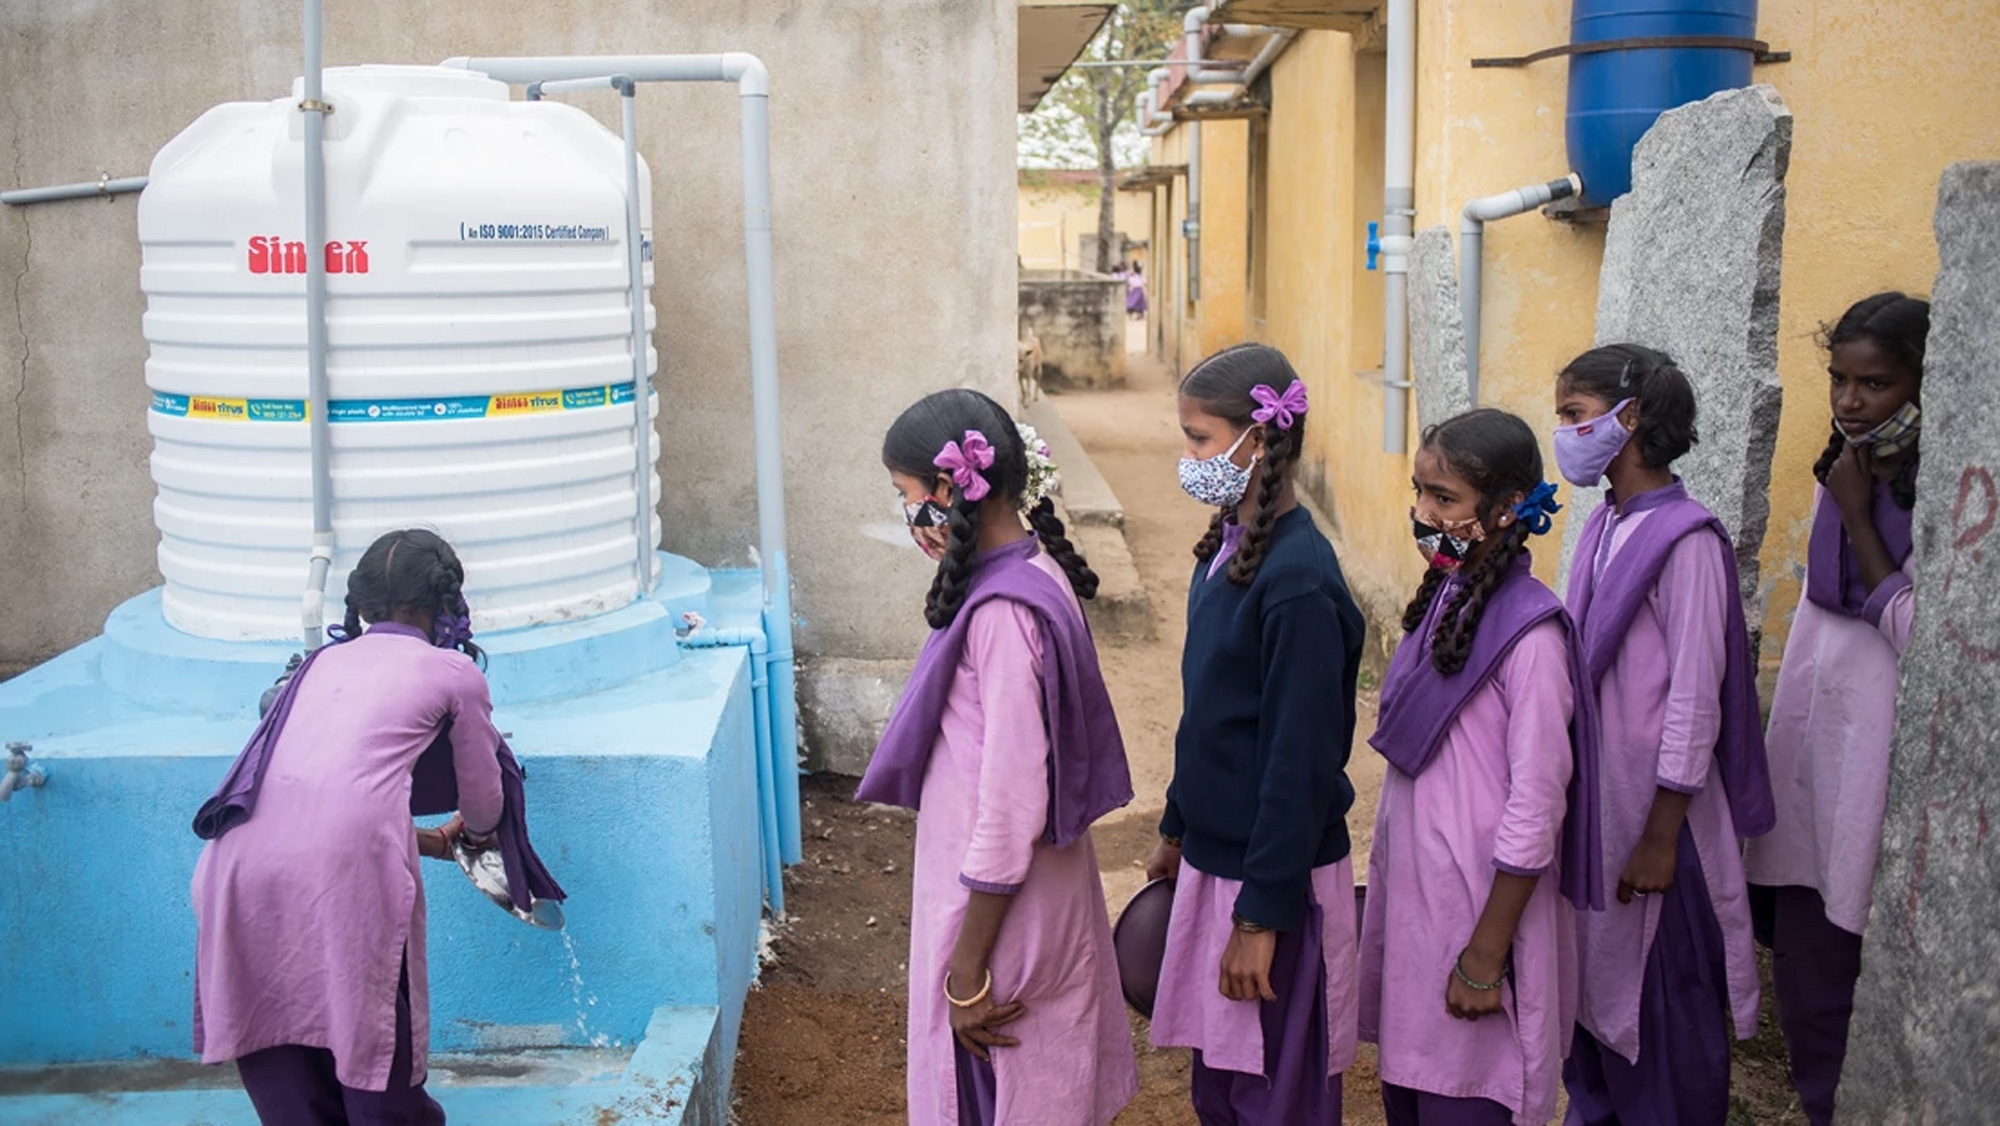 An image of six girls lining up to get water waring purple uniforms. 